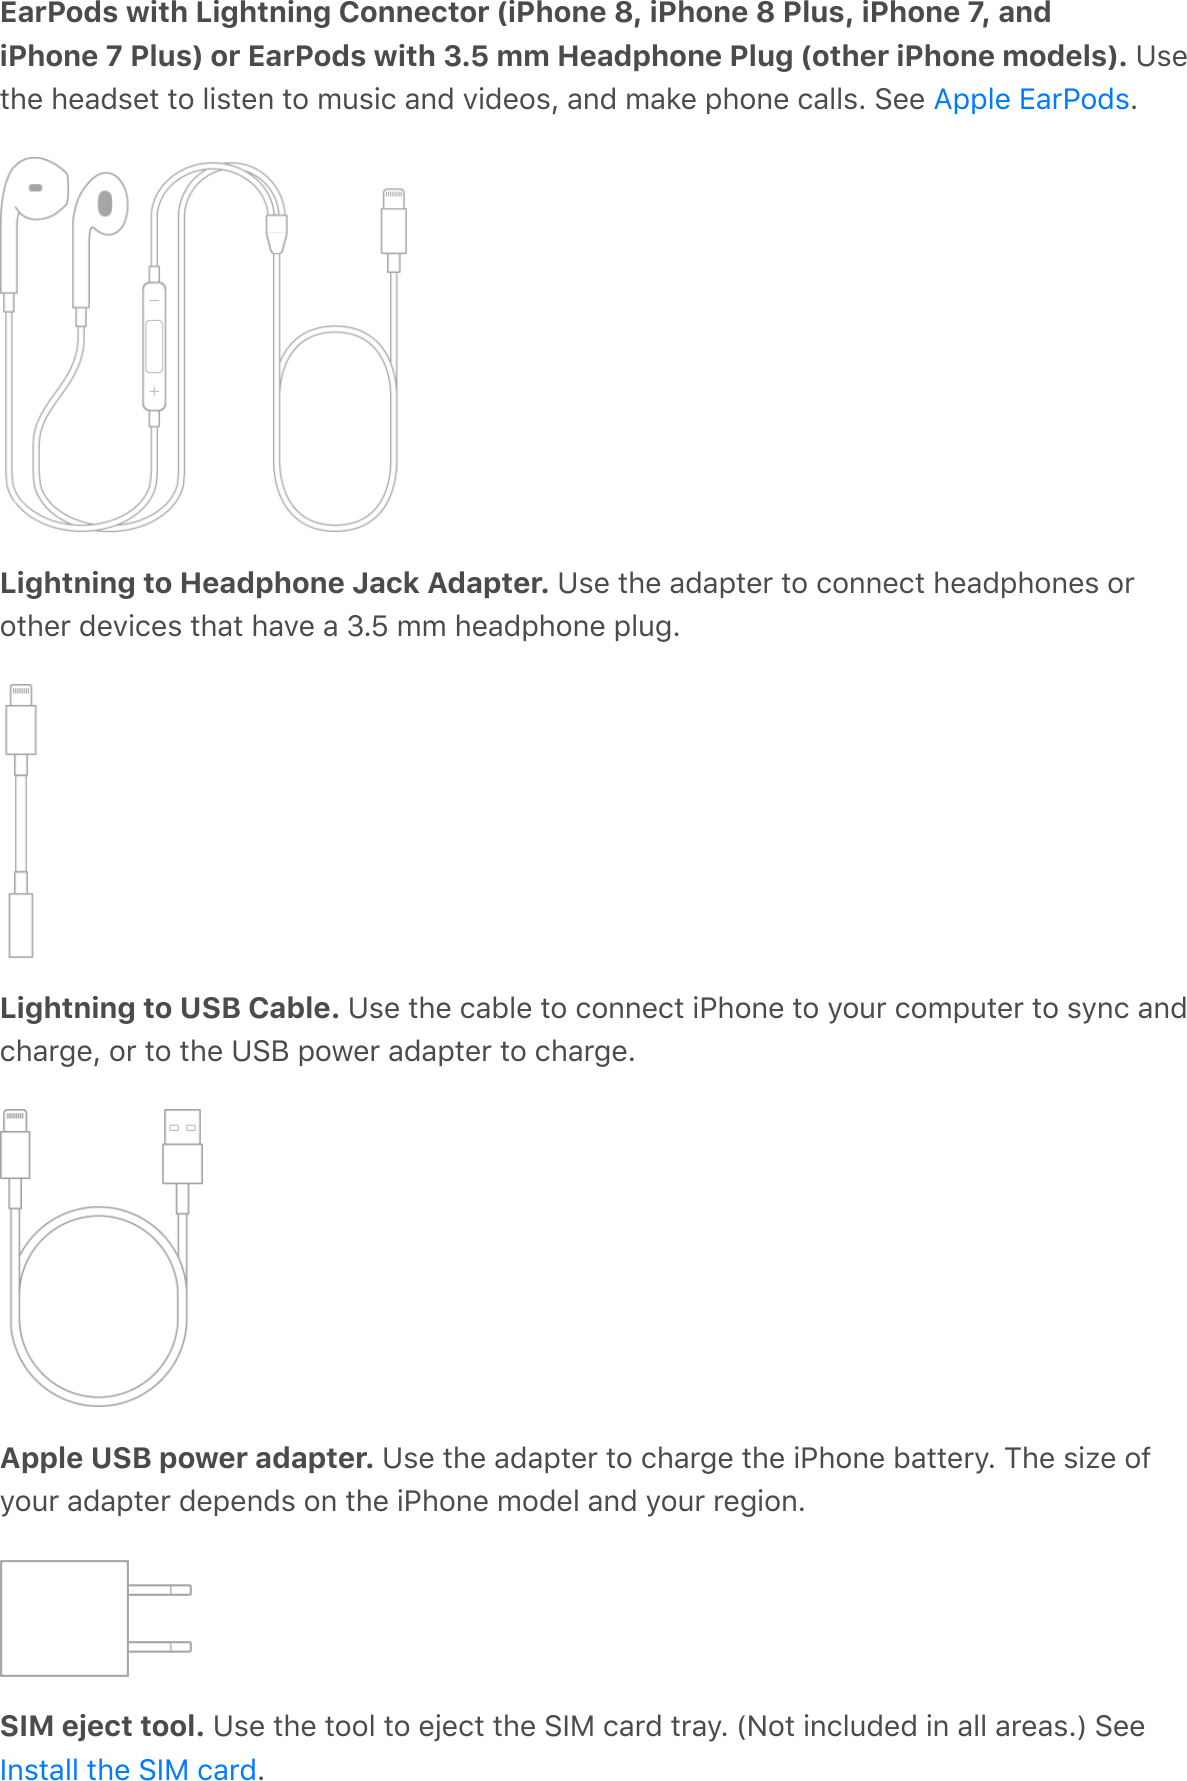 EarPods with Lightning Connector (iPhone 8, iPhone 8 Plus, iPhone 7, andiPhone 7 Plus) or EarPods with 3.5 mm Headphone Plug (other iPhone models). Usethe headset to listen to music and videos, and make phone calls. See  .Lightning to Headphone Jack Adapter. Use the adapter to connect headphones orother devices that have a 3.5 mm headphone plug.Lightning to USB Cable. Use the cable to connect iPhone to your computer to sync andcharge, or to the USB power adapter to charge.Apple USB power adapter. Use the adapter to charge the iPhone battery. The size ofyour adapter depends on the iPhone model and your region.SIM eject tool. Use the tool to eject the SIM card tray. (Not included in all areas.) See.Apple EarPodsInstall the SIM card